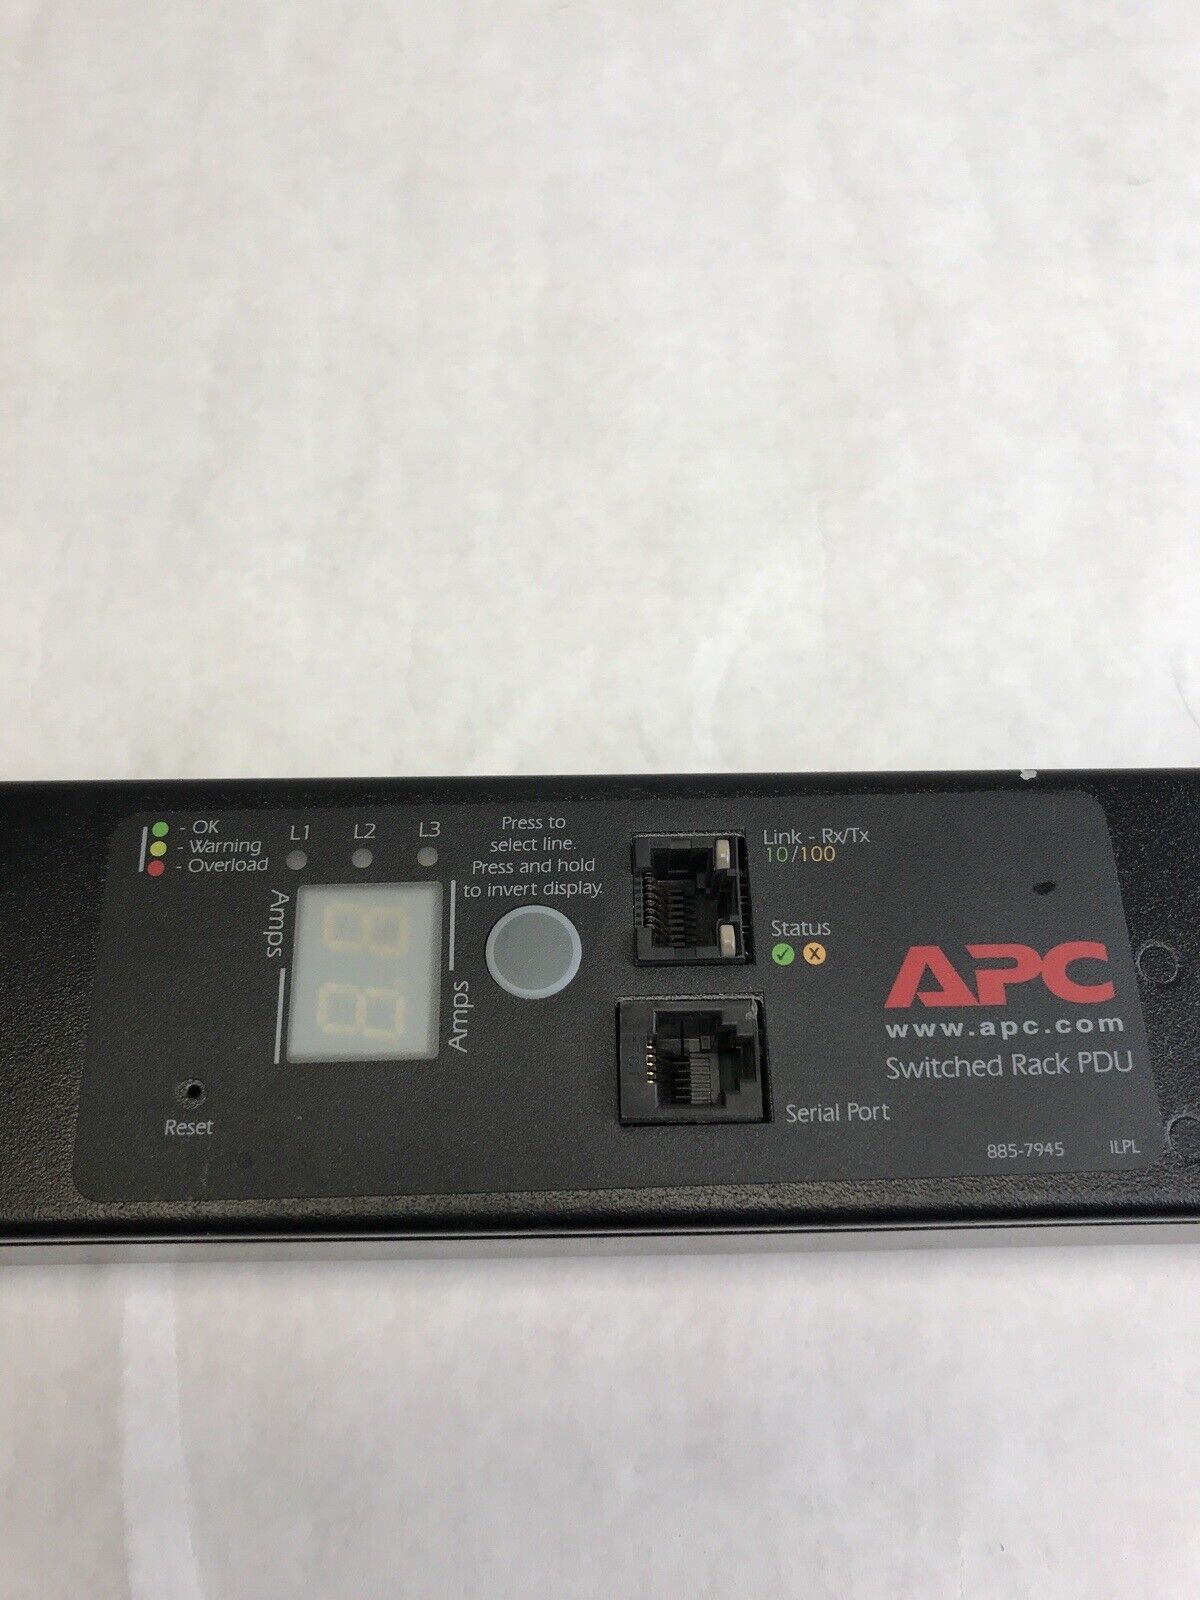 APC AP7990 Switched Rack PDU (Tested and Working)